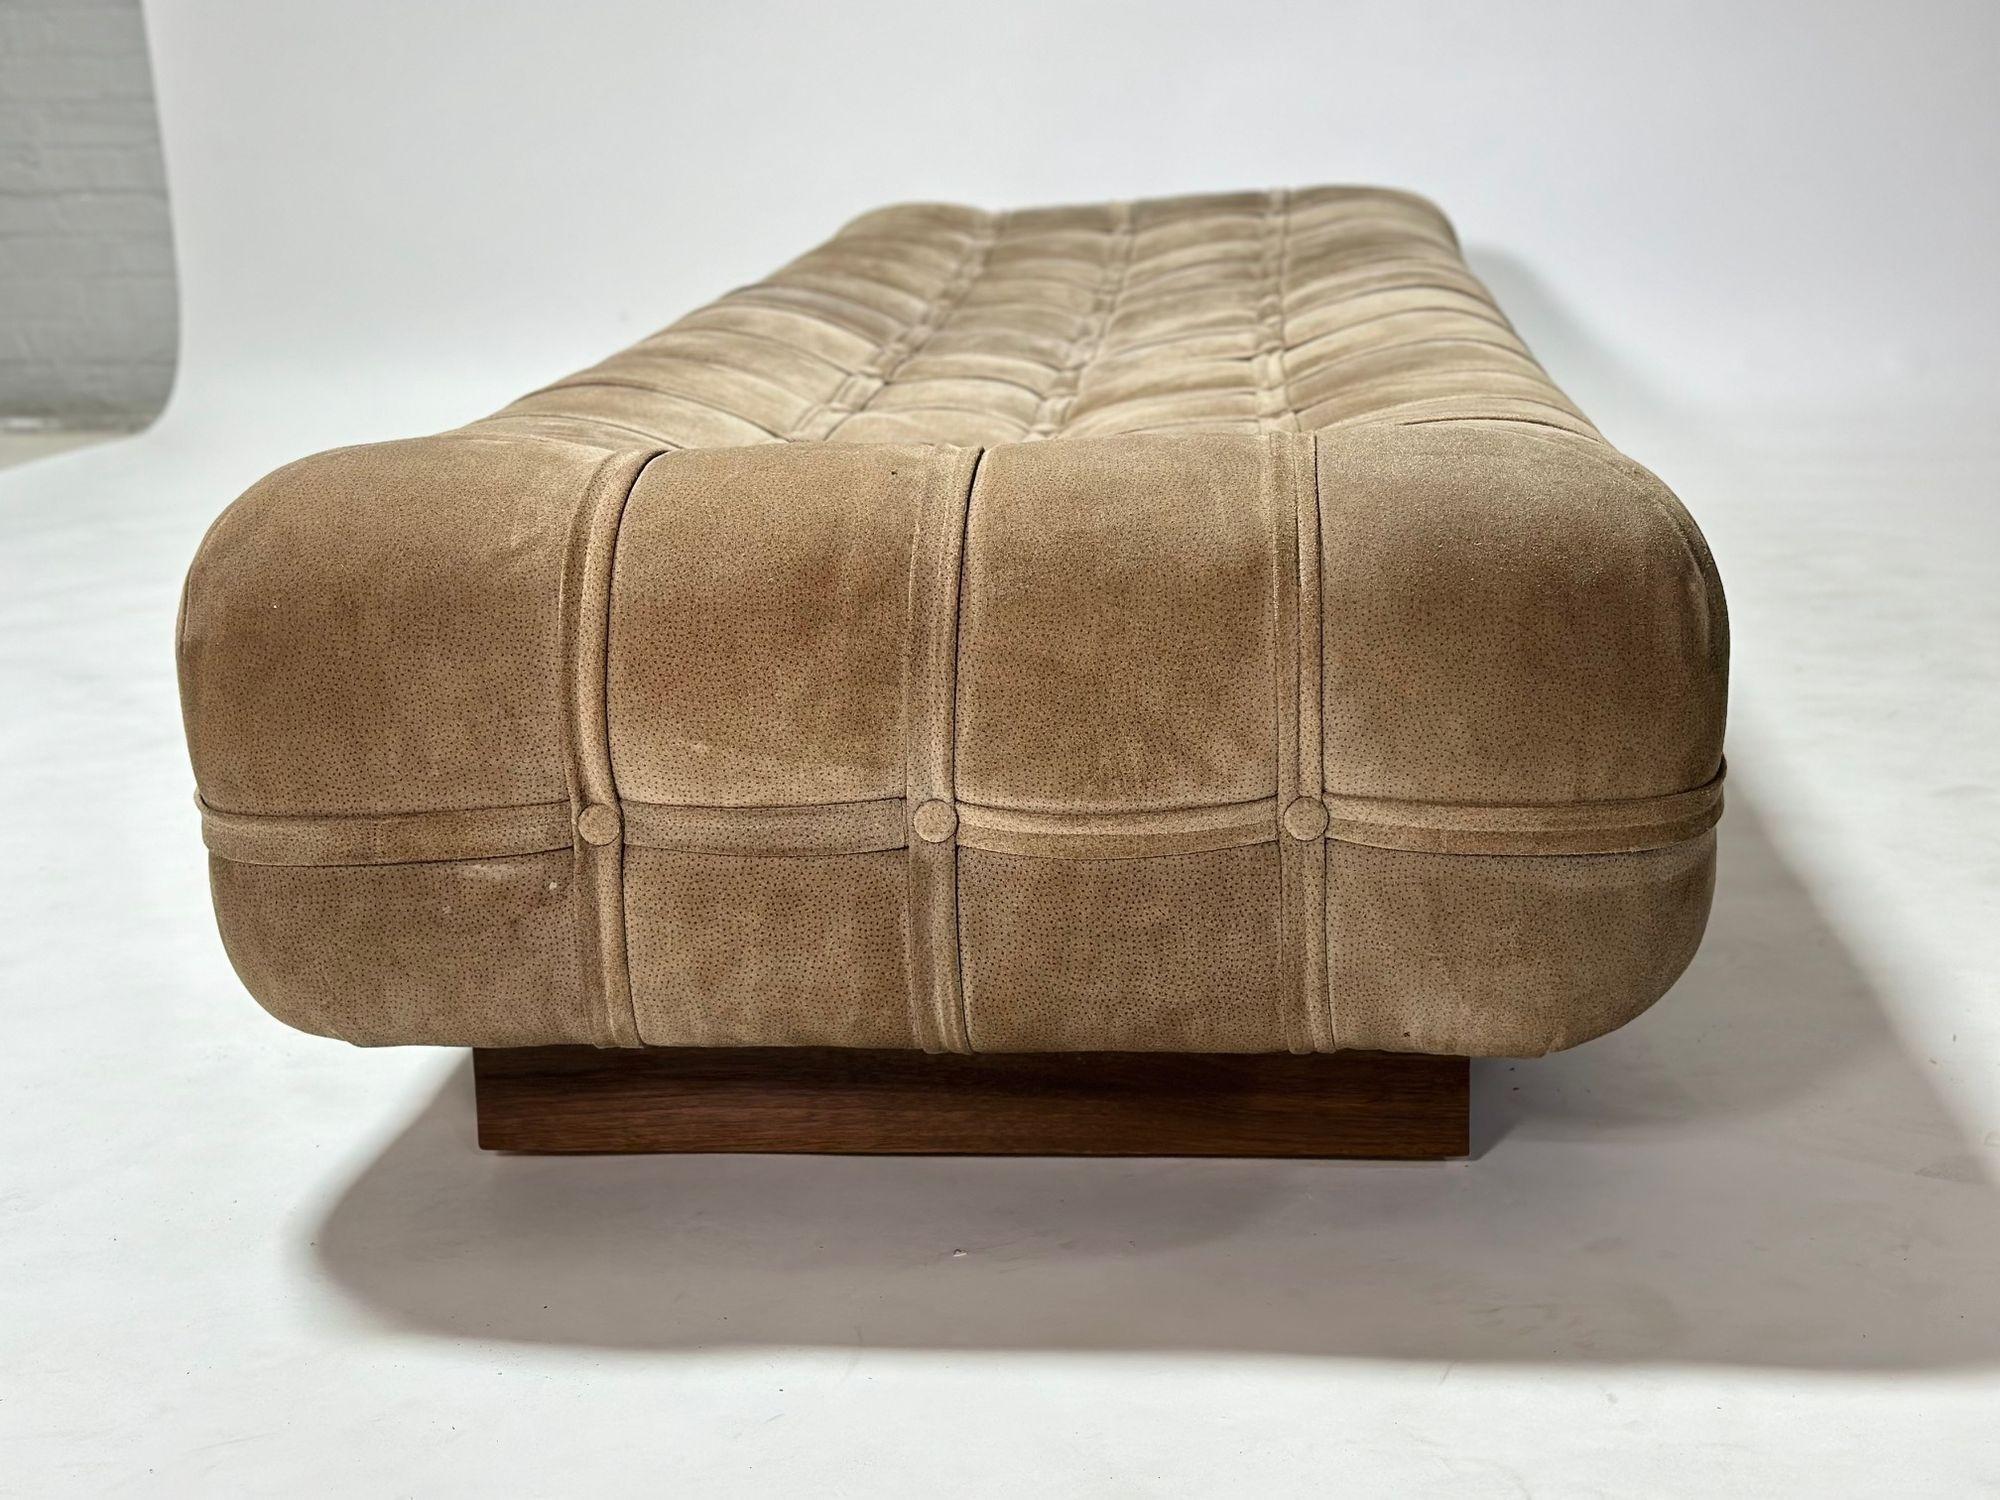 Suede Marshmallow Pouf Bench/ Daybed on Walnut Plinth Base, 1970 In Good Condition For Sale In Chicago, IL